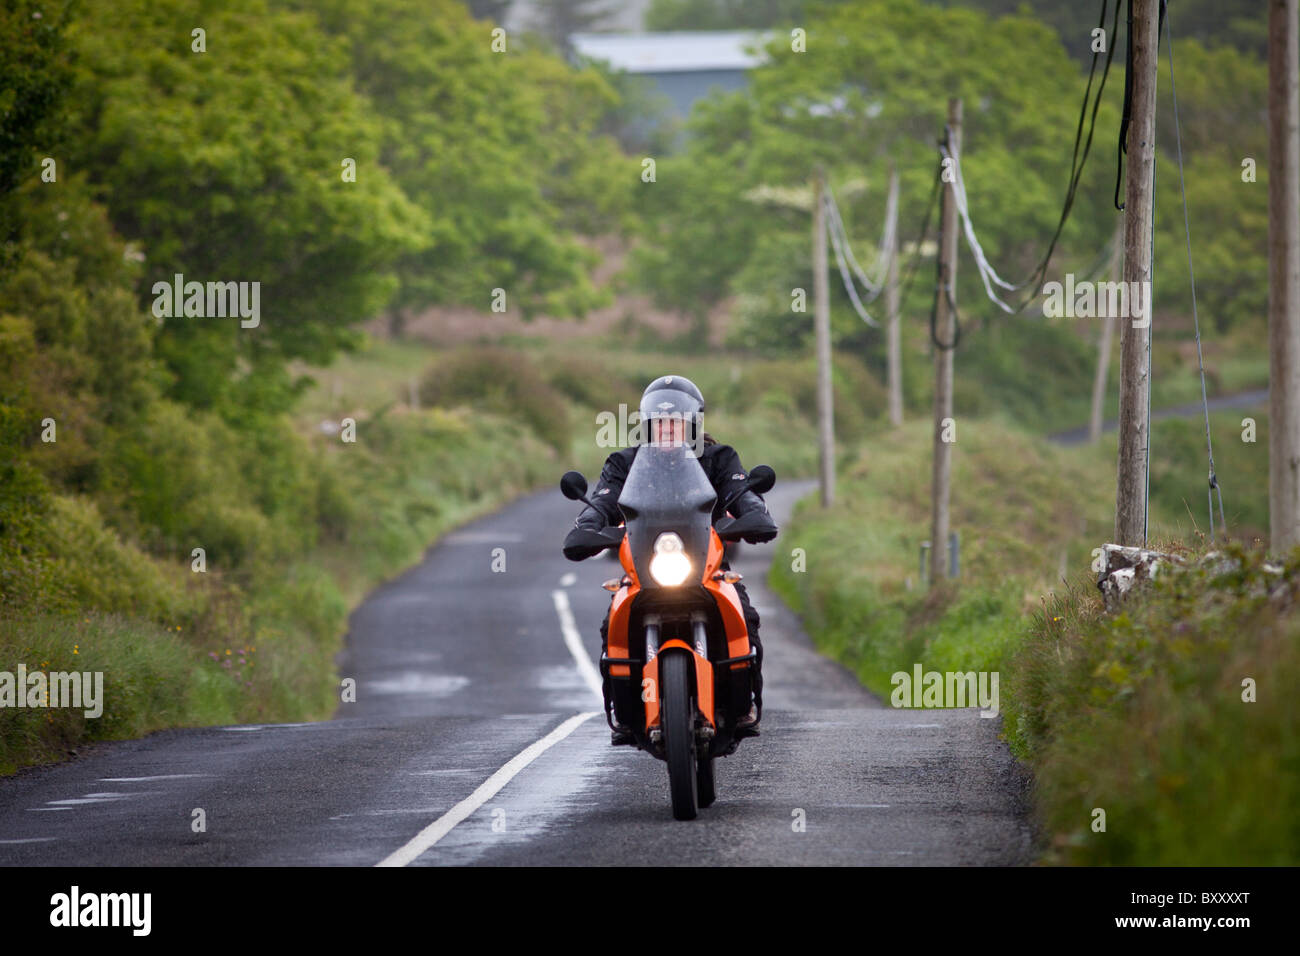 Motorcyclist in country lane in County Clare, West of Ireland Stock Photo